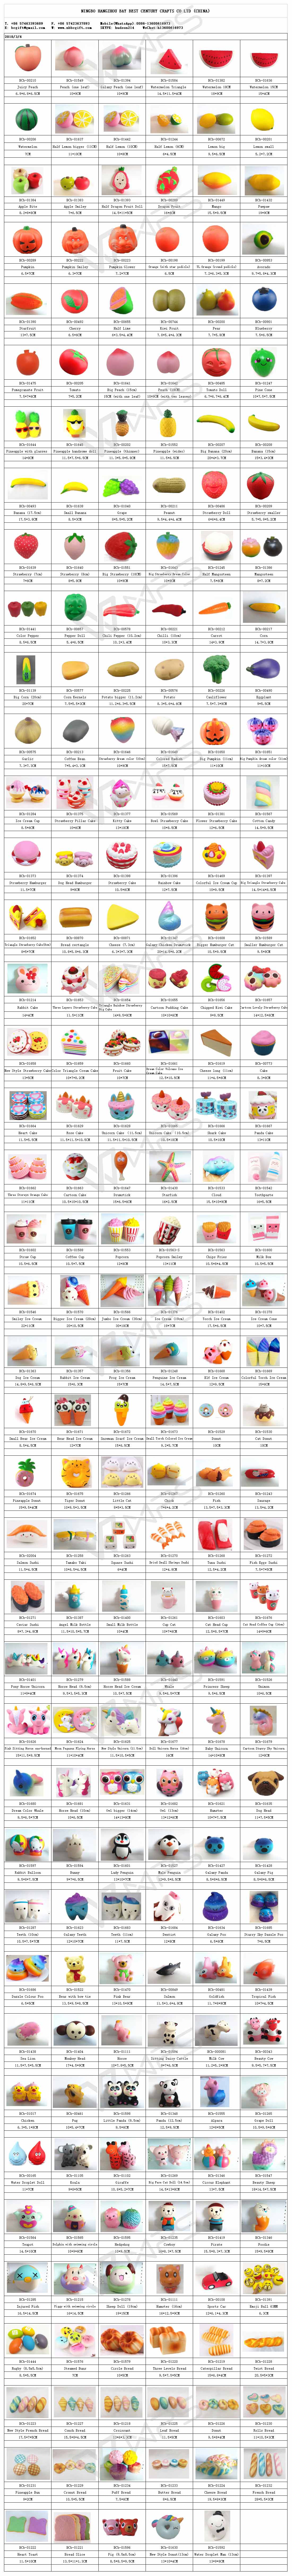 Catalogue of Hot Sale Squishies PU Slow Rising Squishy Toys